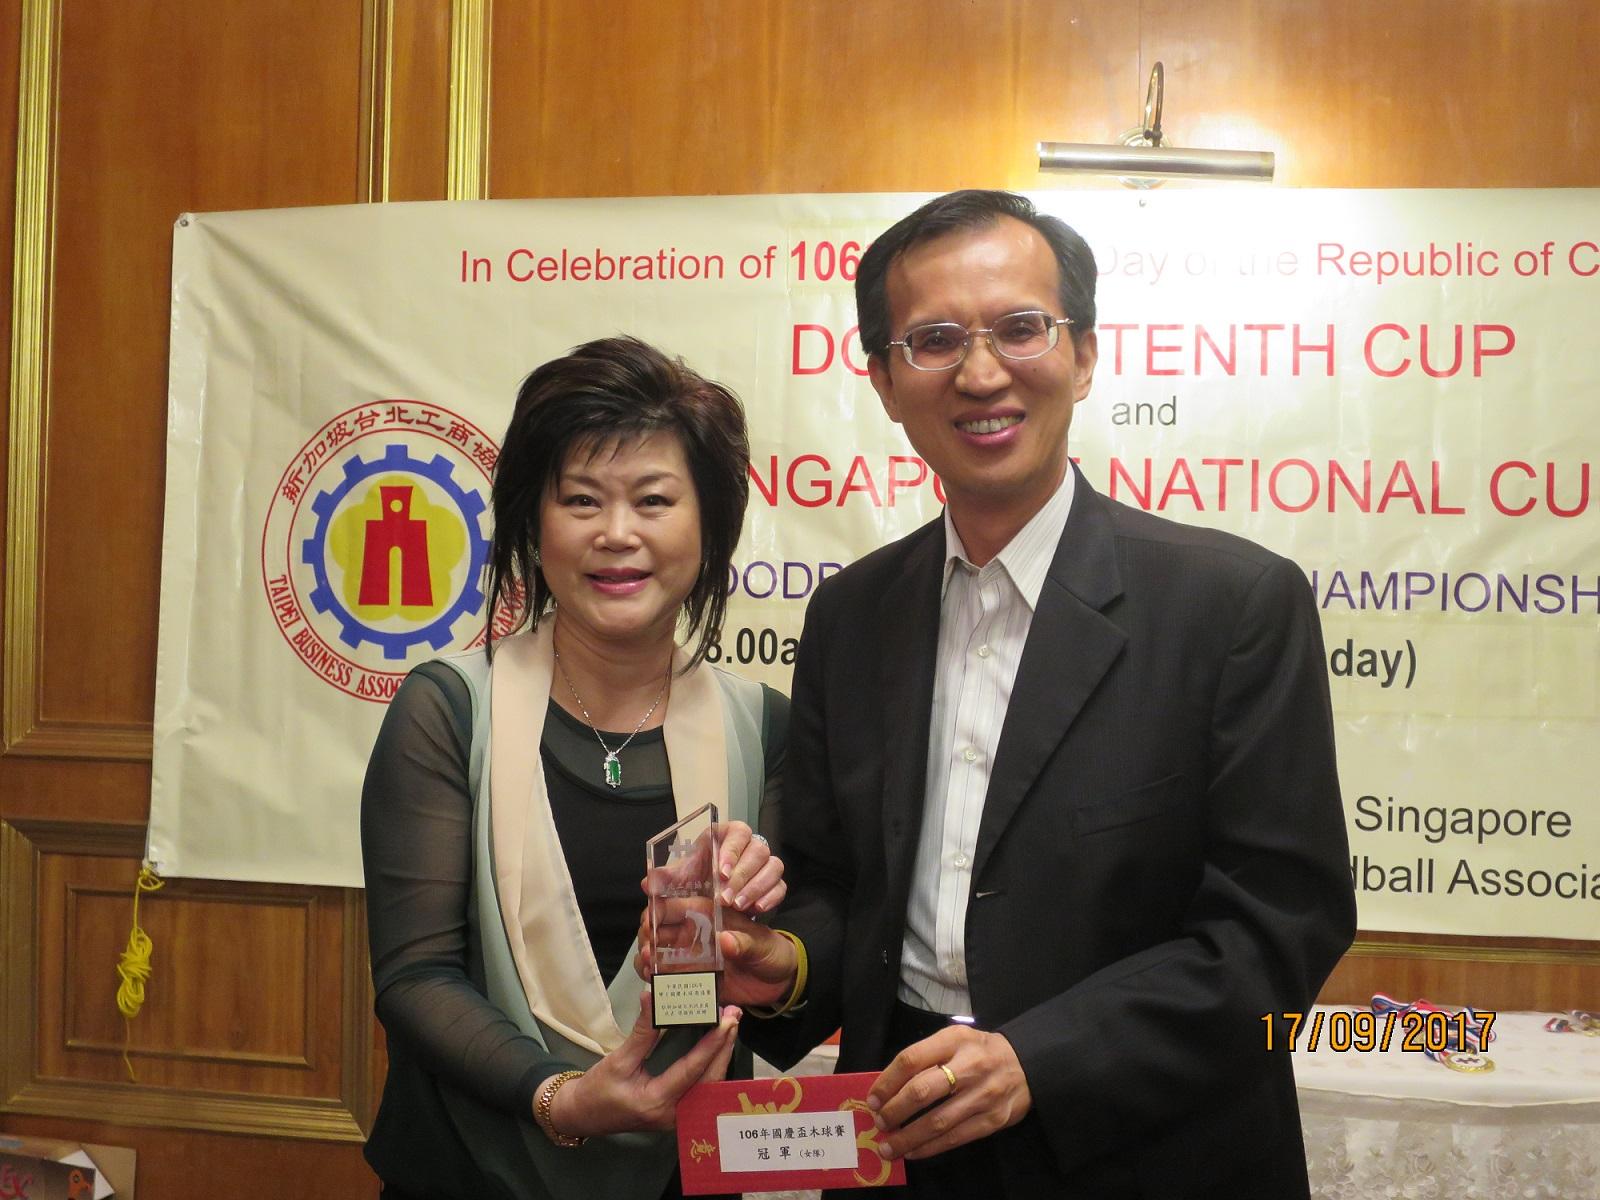 Deputy Representative Steven Tai presenting the trophy and prize to the champion in the women's individual category.